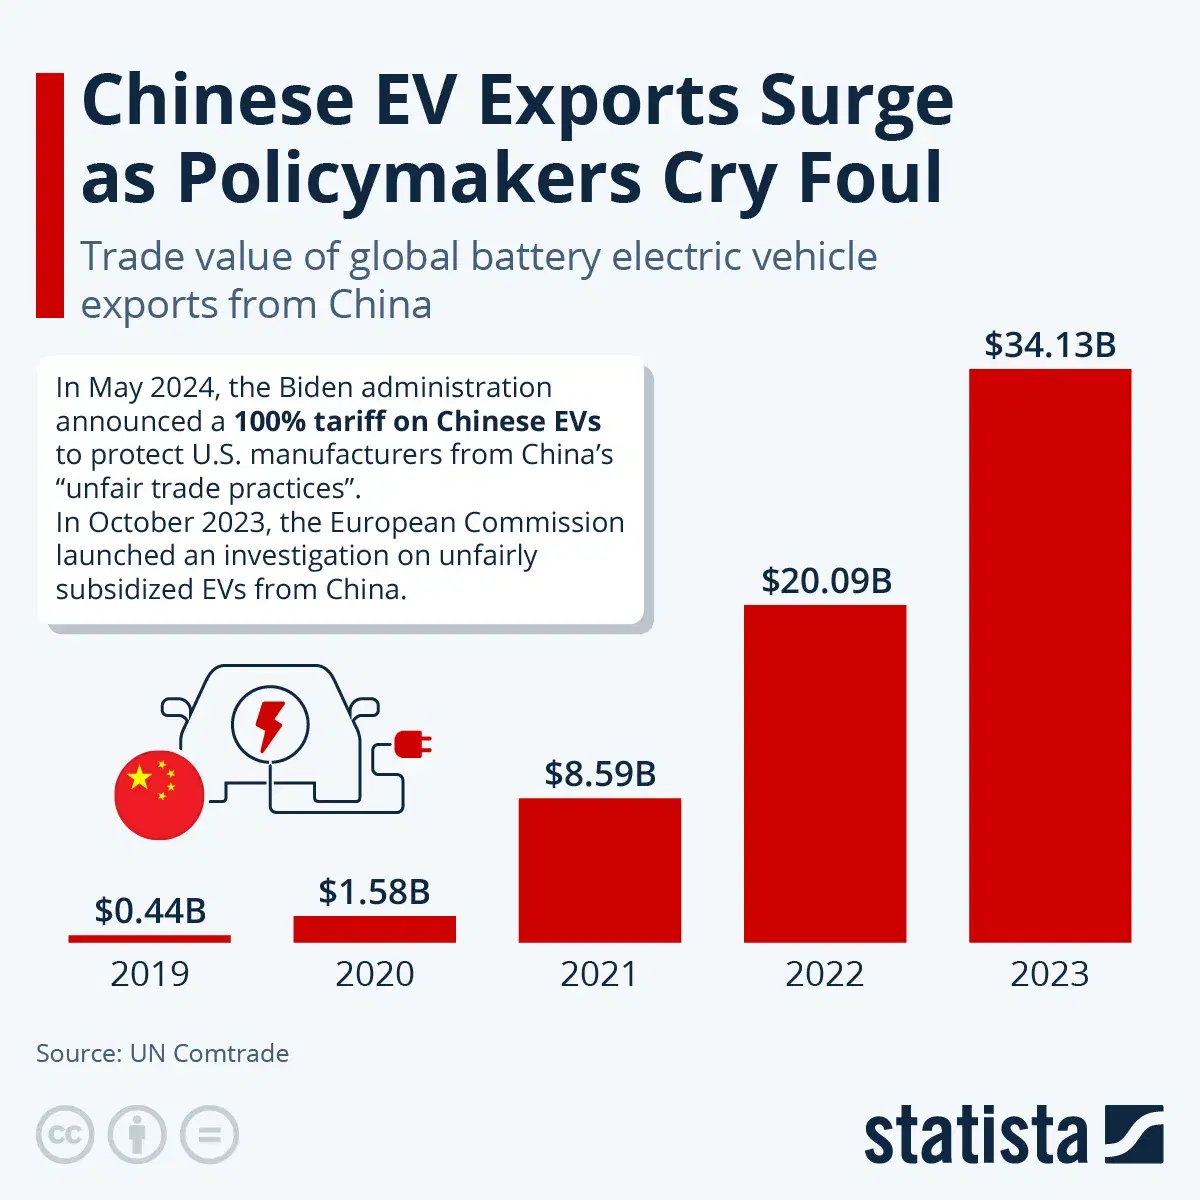 Chinese EV Exports Surge as Policymakers Cry Foul